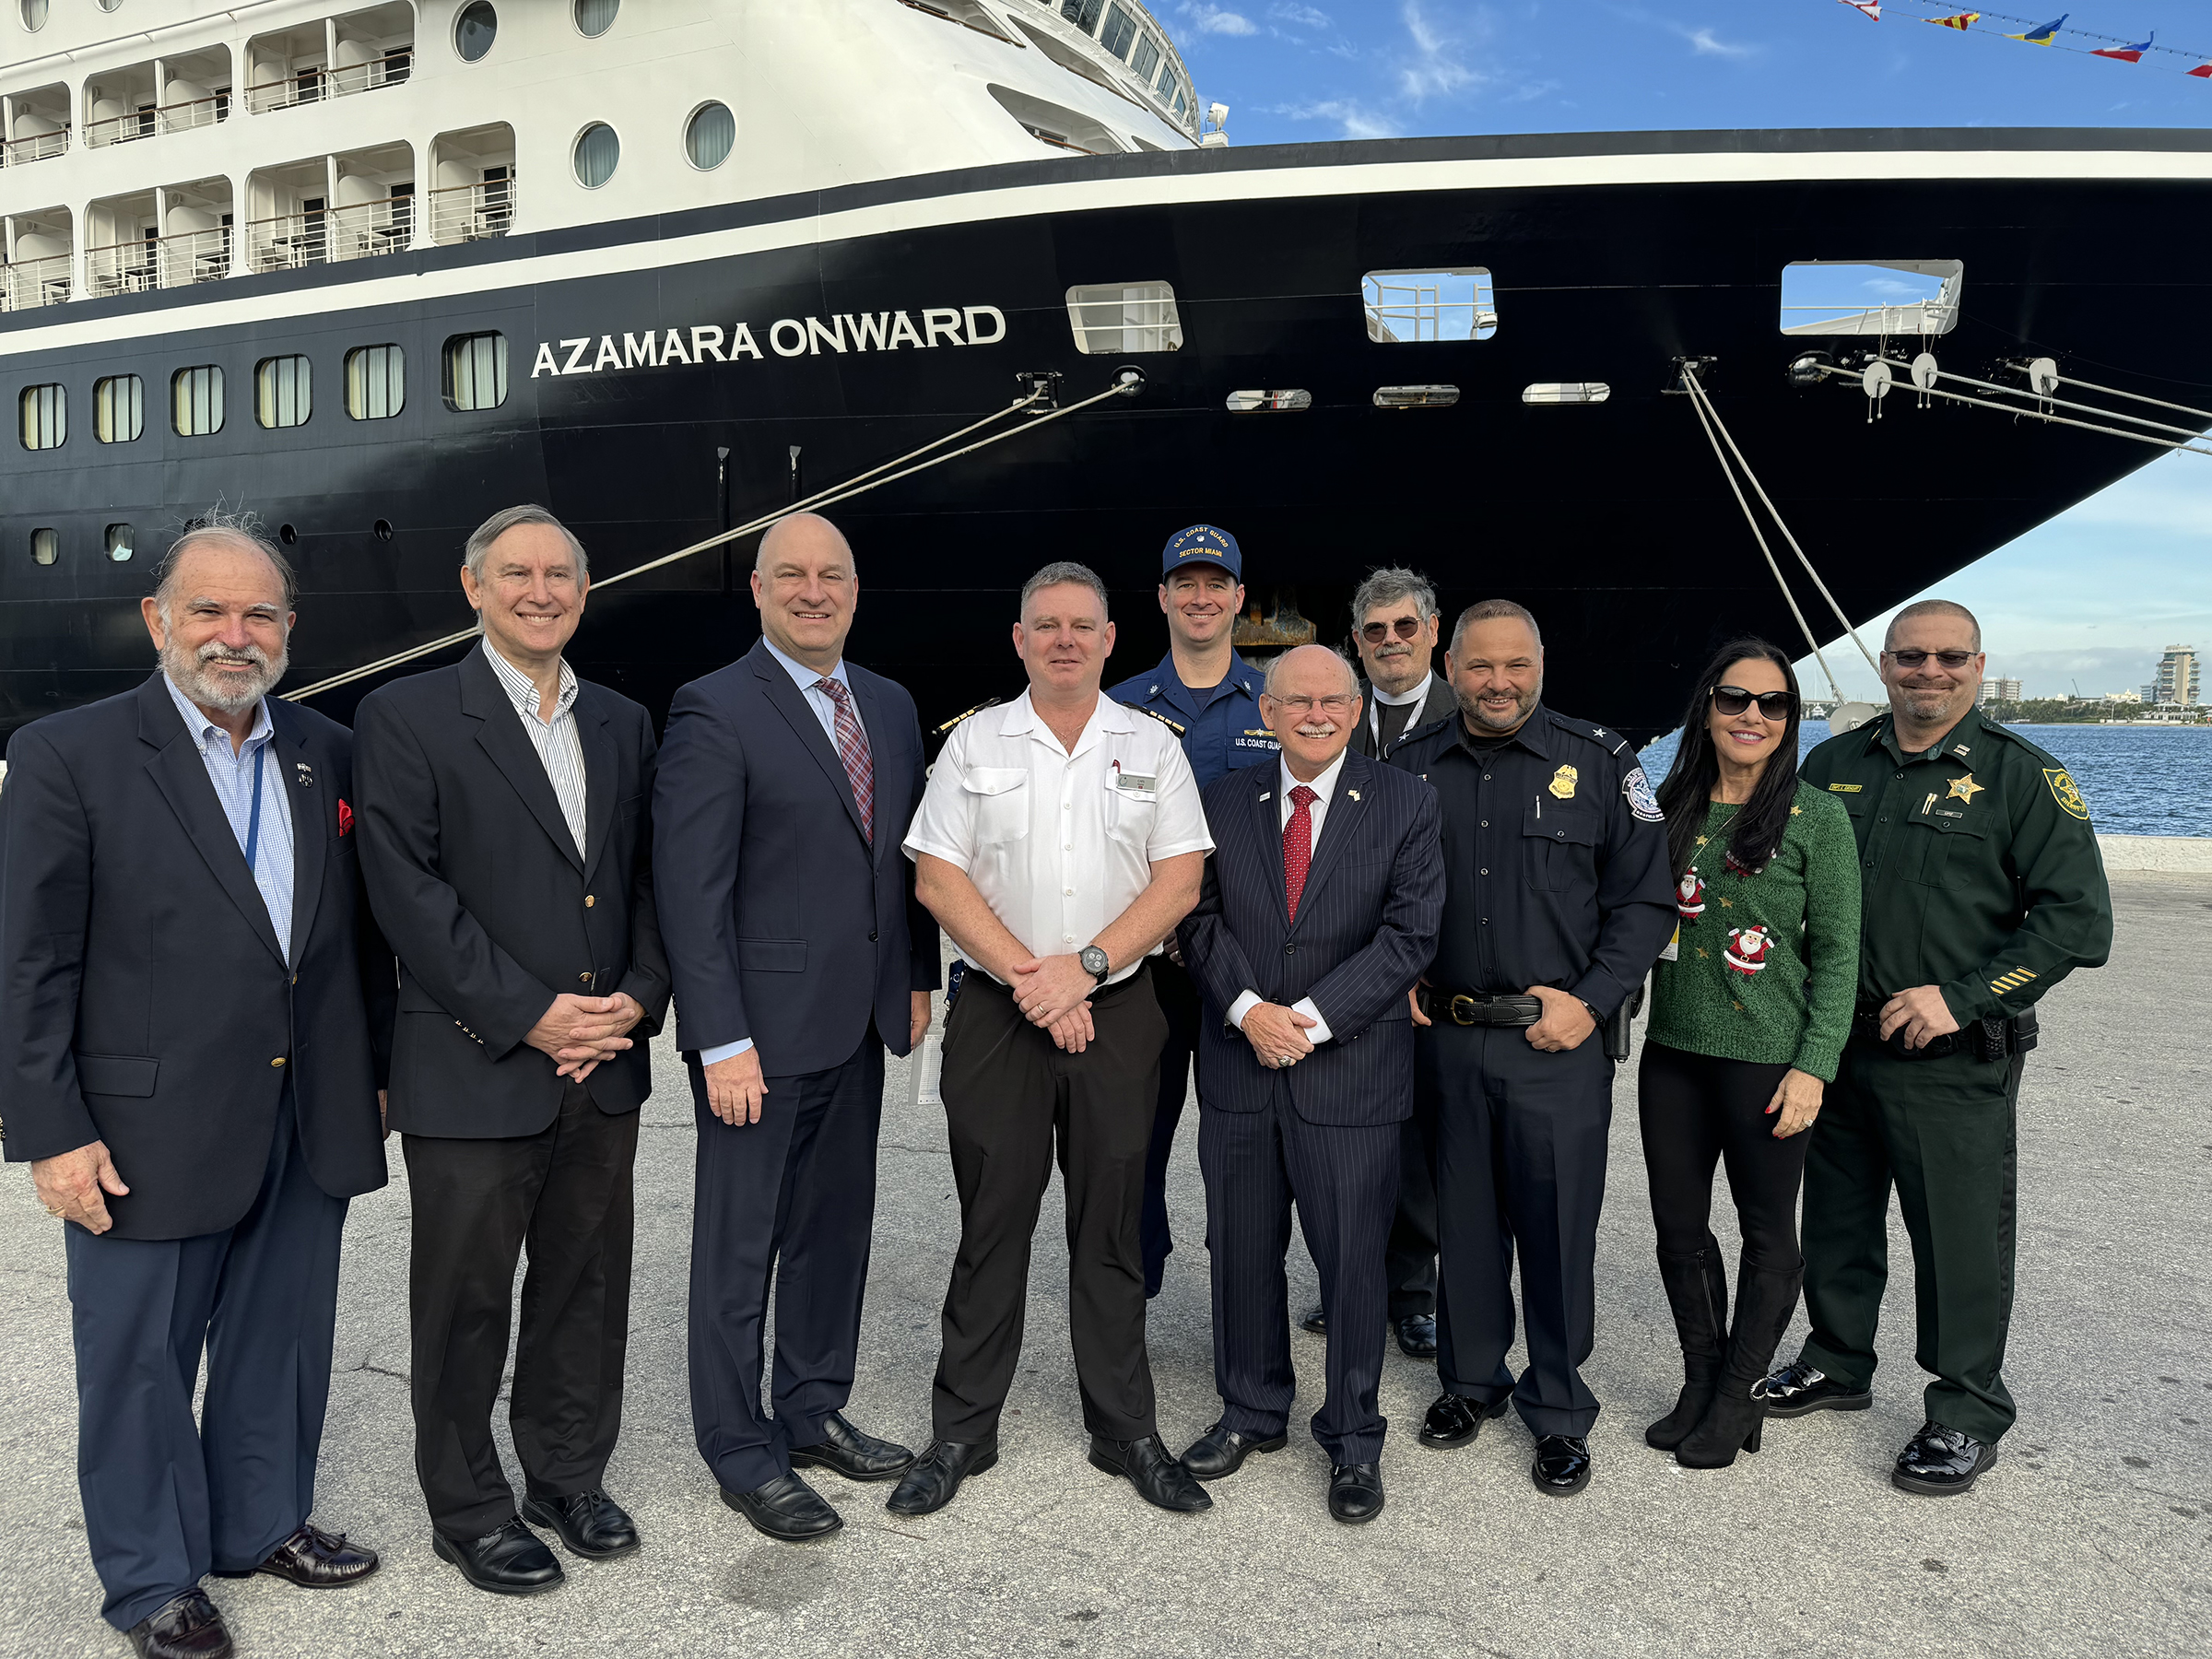 Today, Port Everglades officially welcomed Azamara Cruises for the first time and Azamara Onward to its new South Florida winter homeport during a traditional dockside plaque-and-key ceremony. As a portal to the world, the greater Fort Lauderdale seaport is an ideal fit for the luxury small-ship cruise line that offers sailings to destinations around the globe.